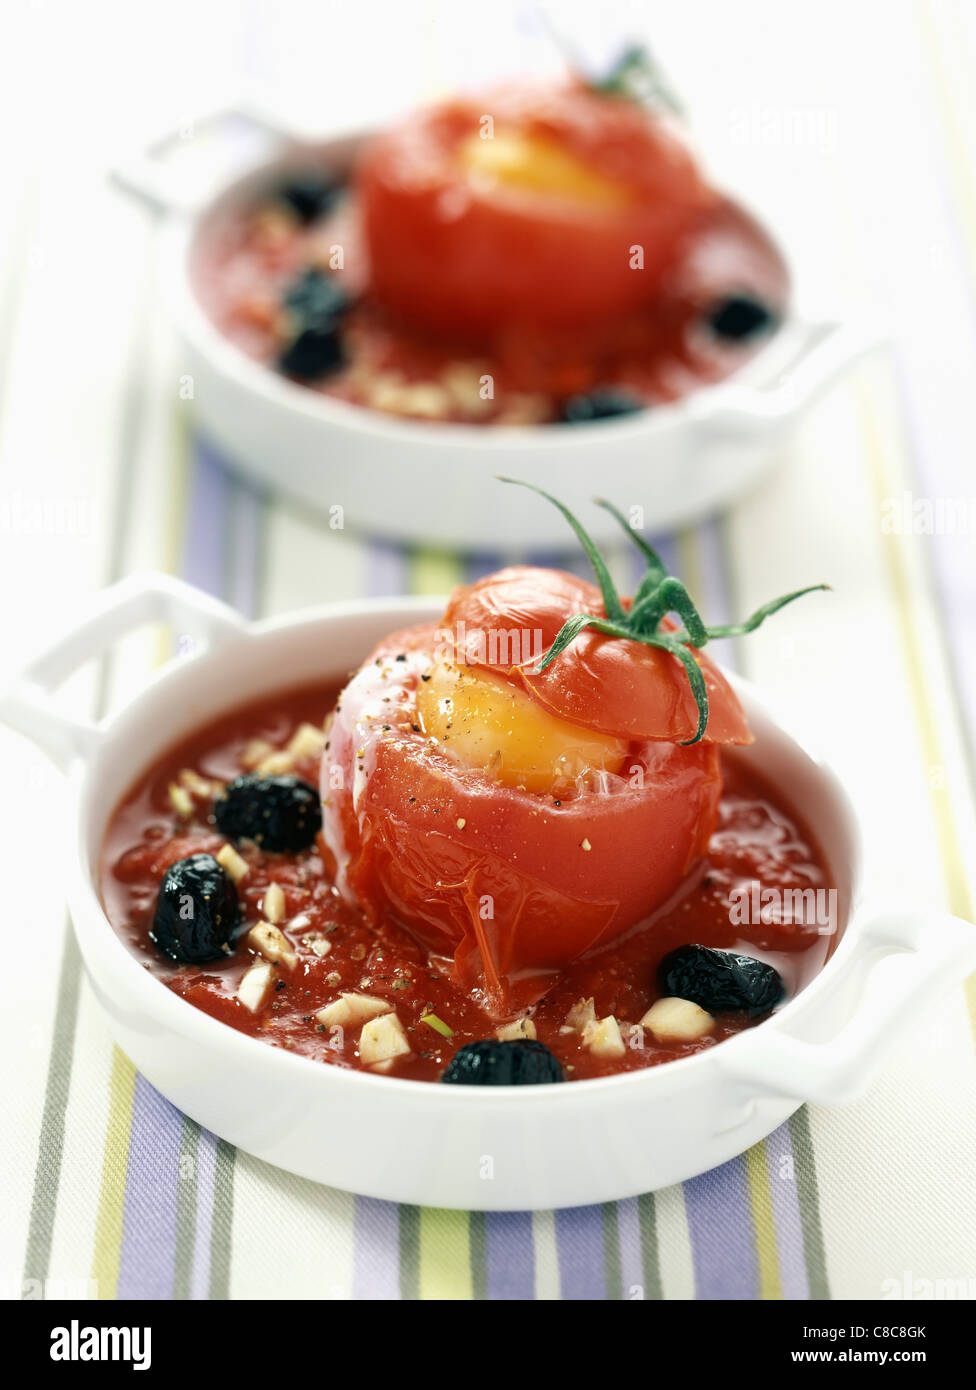 Tomatoes stuffed with eggs and goat cheese Stock Photo